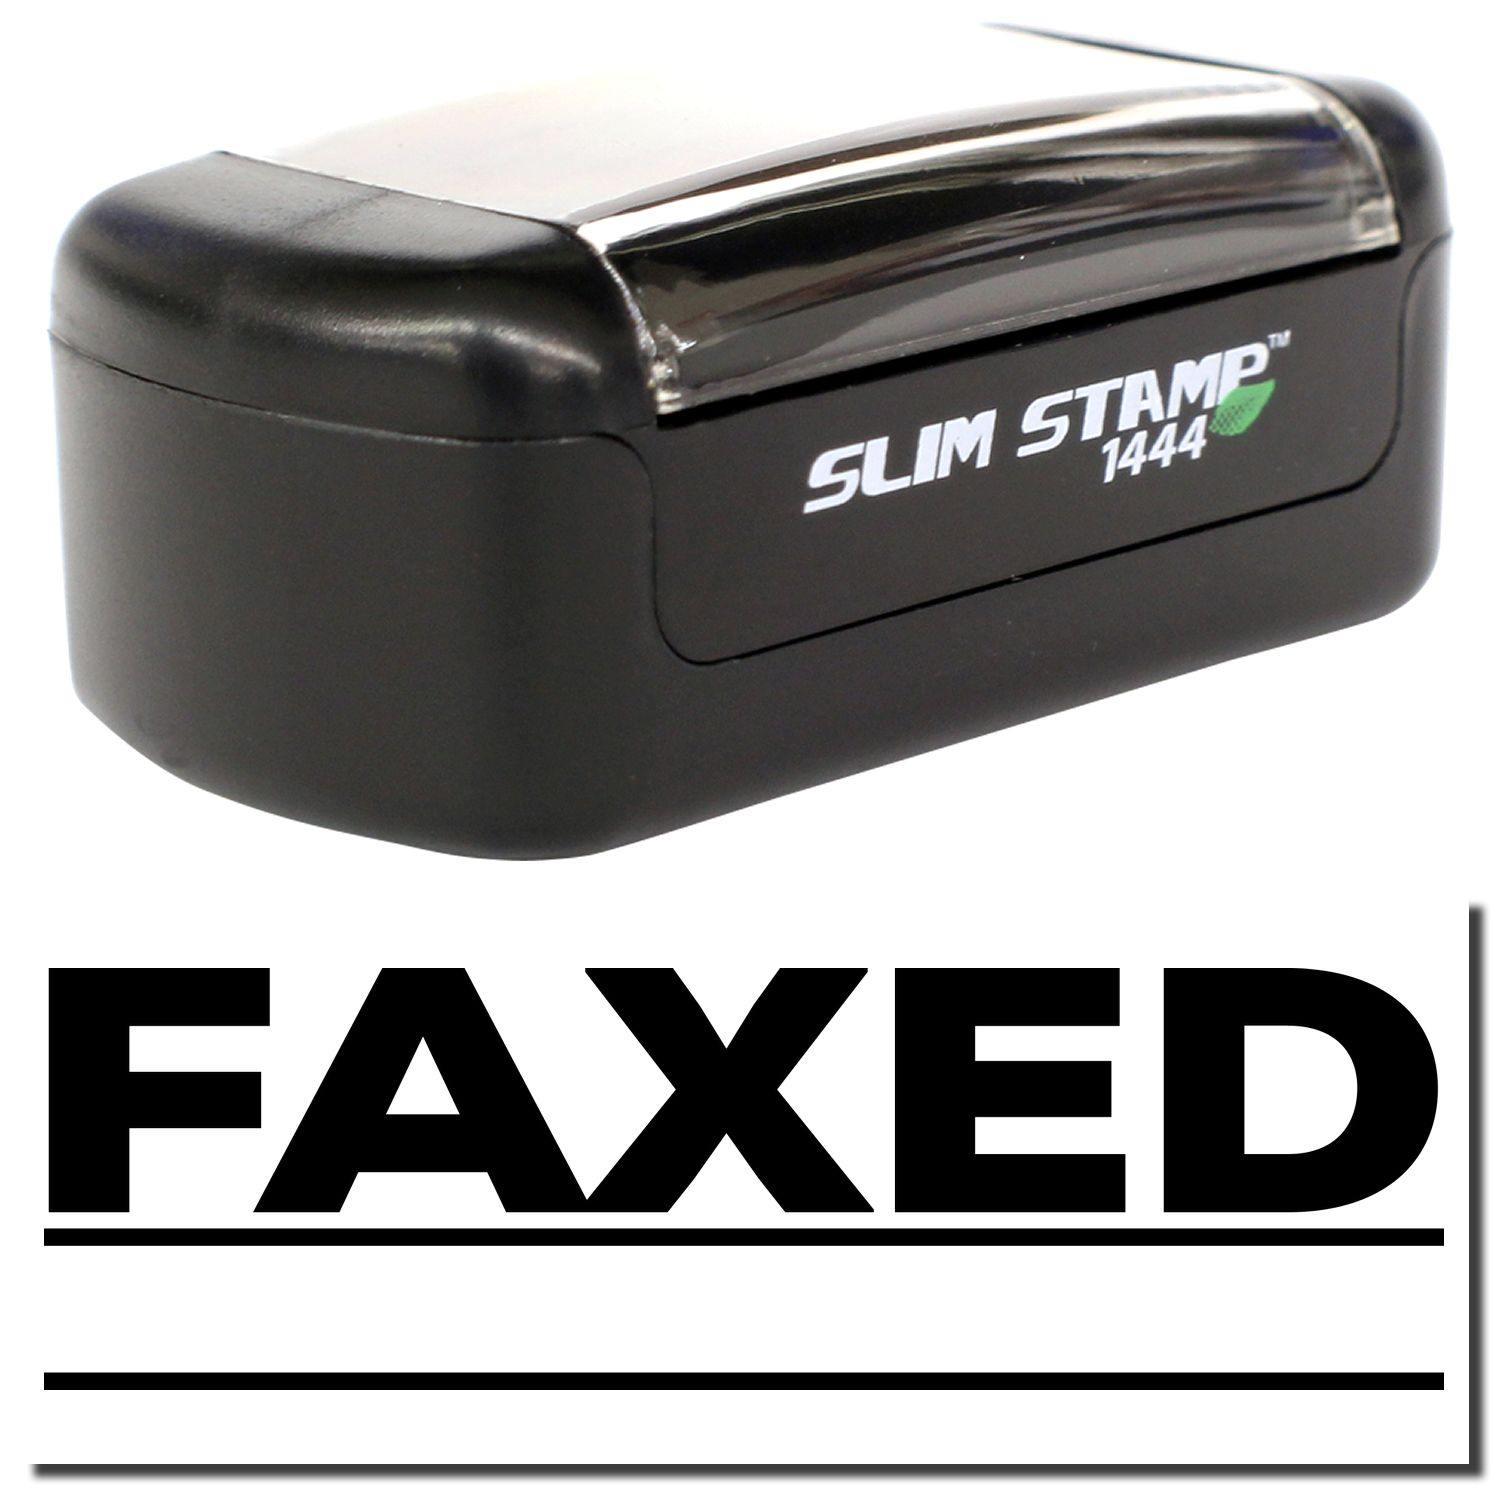 A stock office pre-inked stamp with a stamped image showing how the text "FAXED" with two lines underneath the text is displayed after stamping.